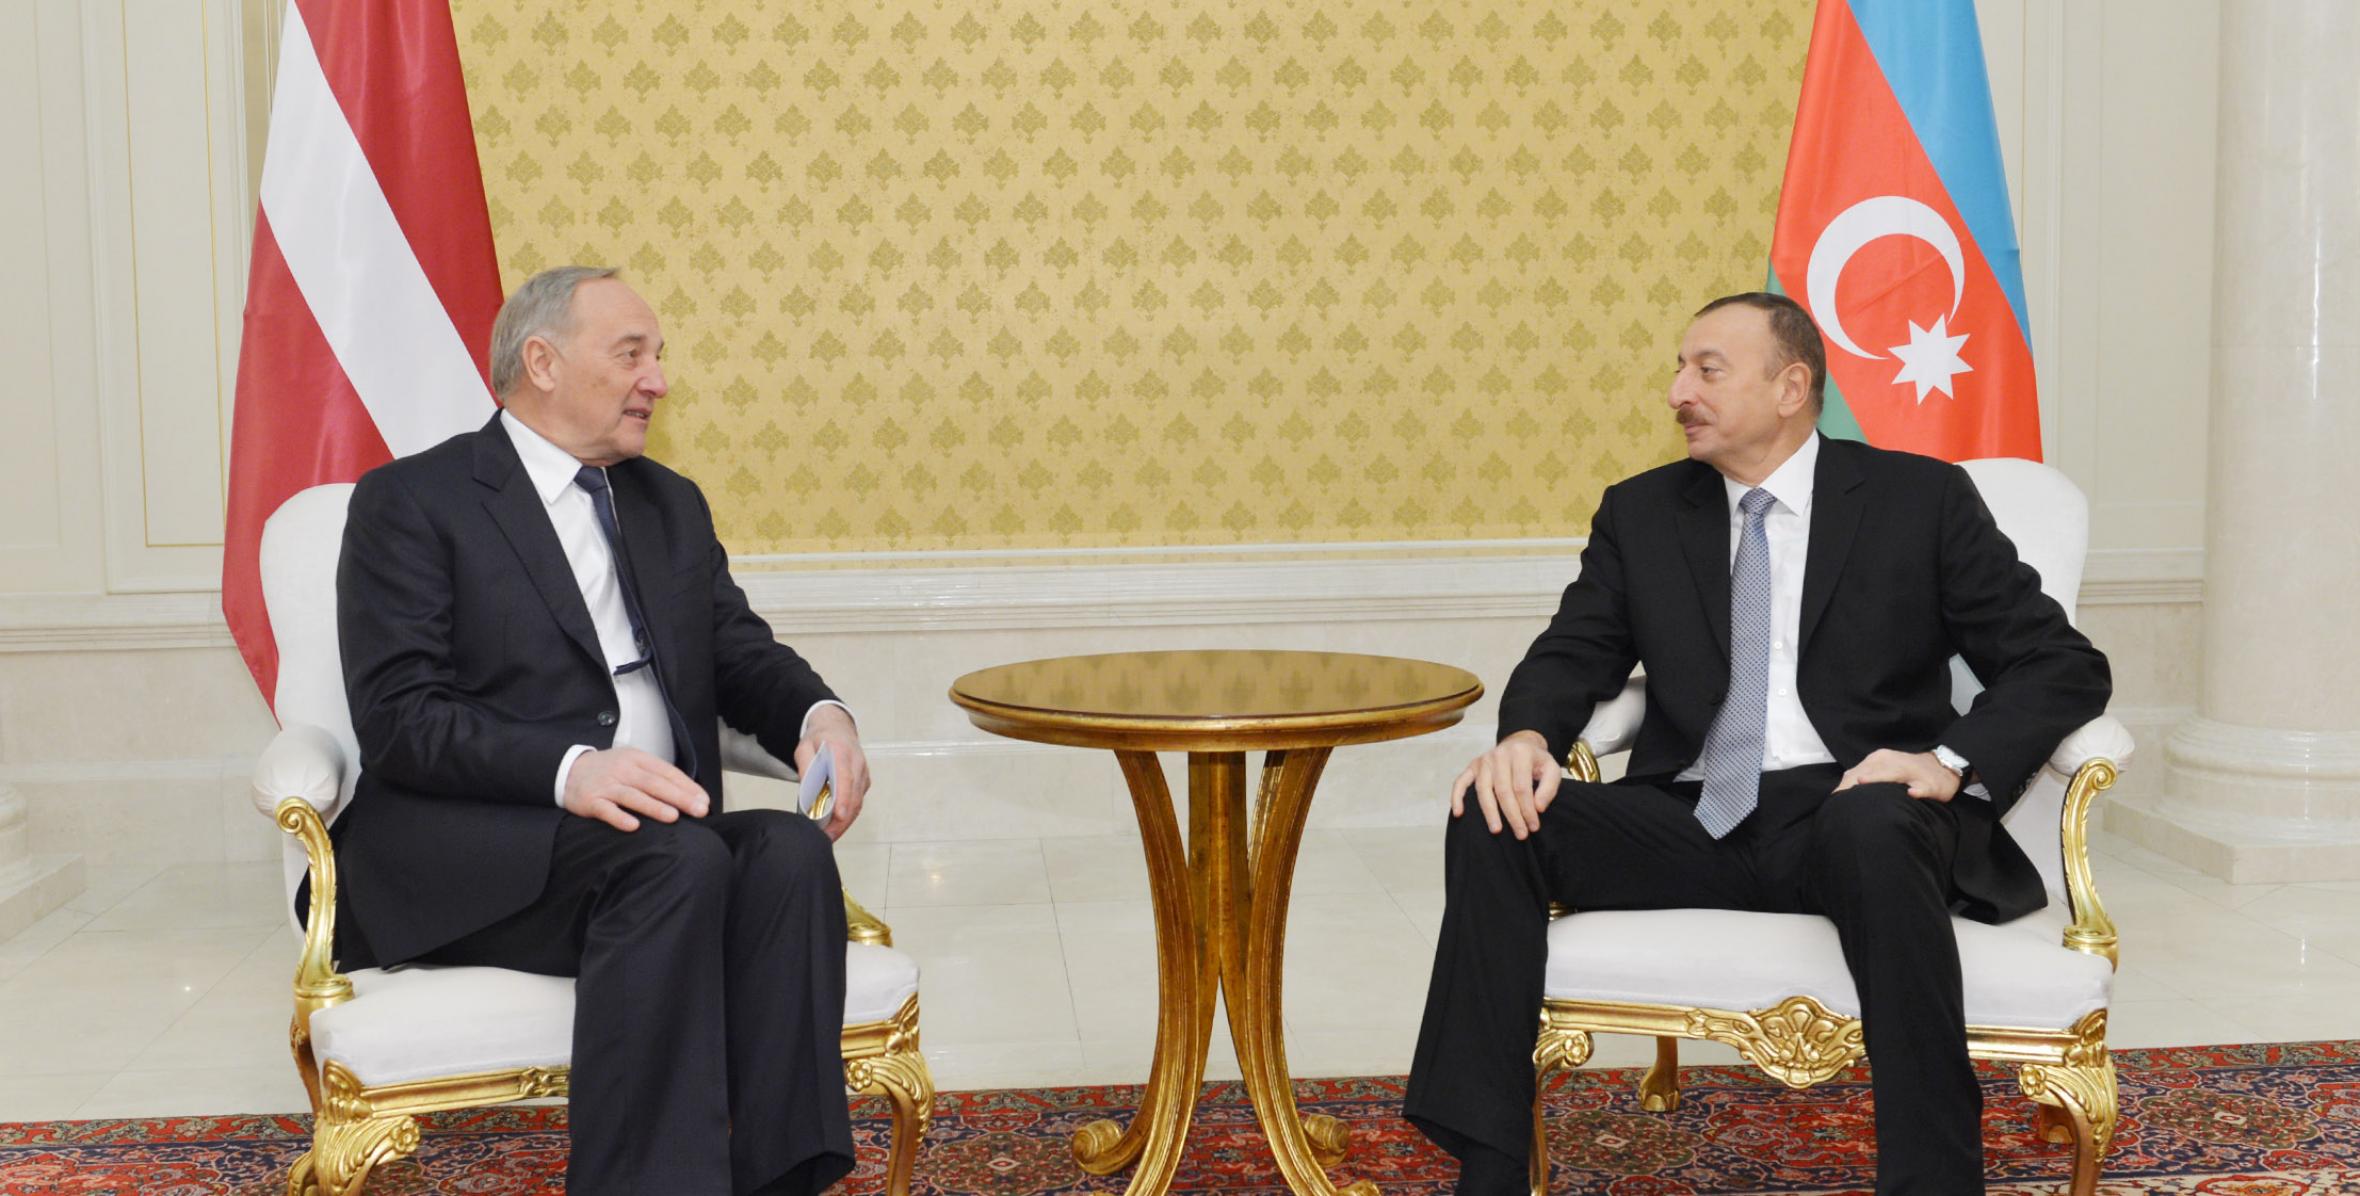 Ilham Aliyev held a one-on-one meeting with President of the Republic of Latvia Andris Berzins